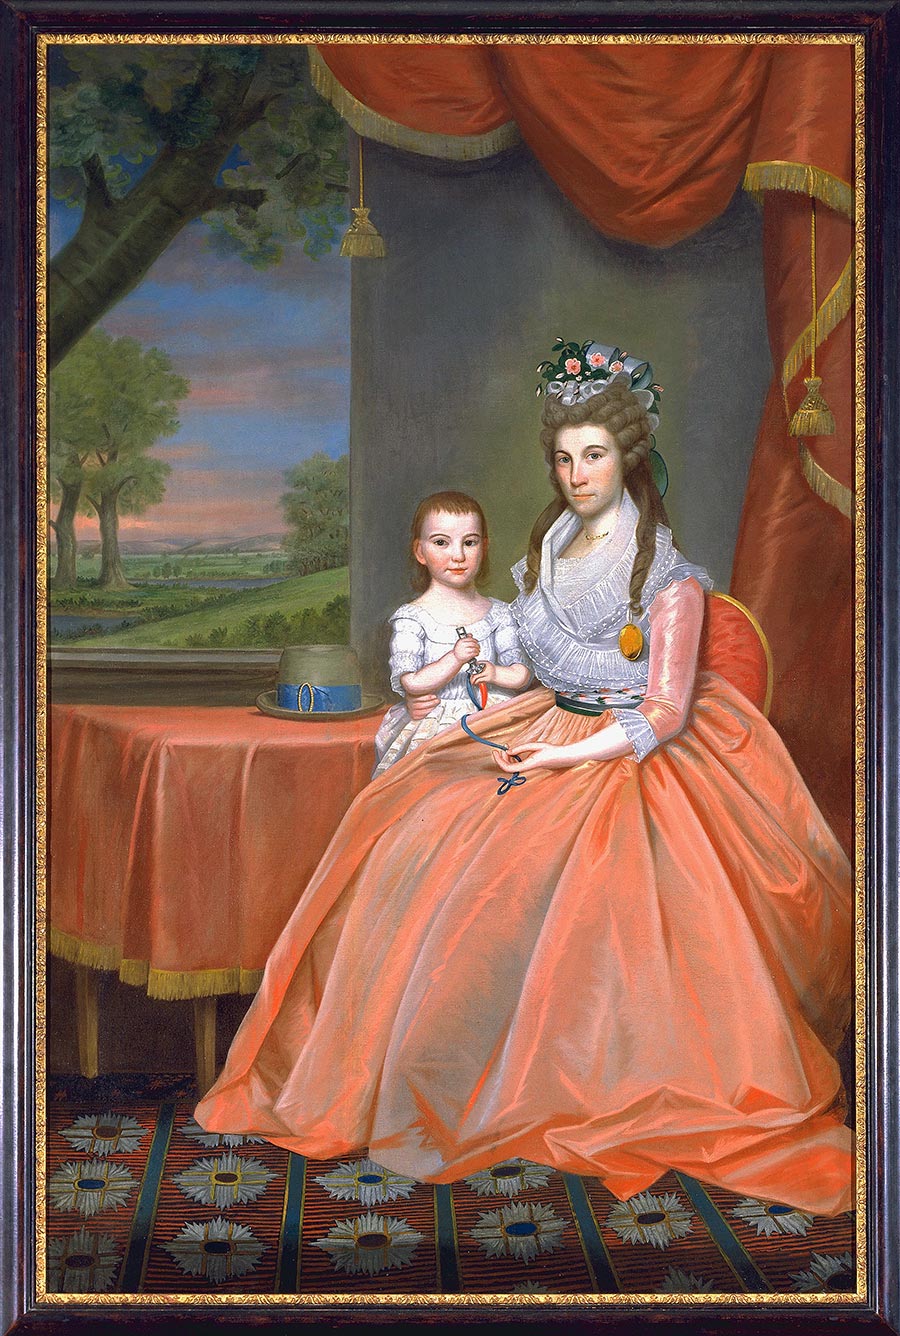 A portrait of a woman sitting with a young boy. Her dress, a tablecloth, and a curtain are all in coral red.